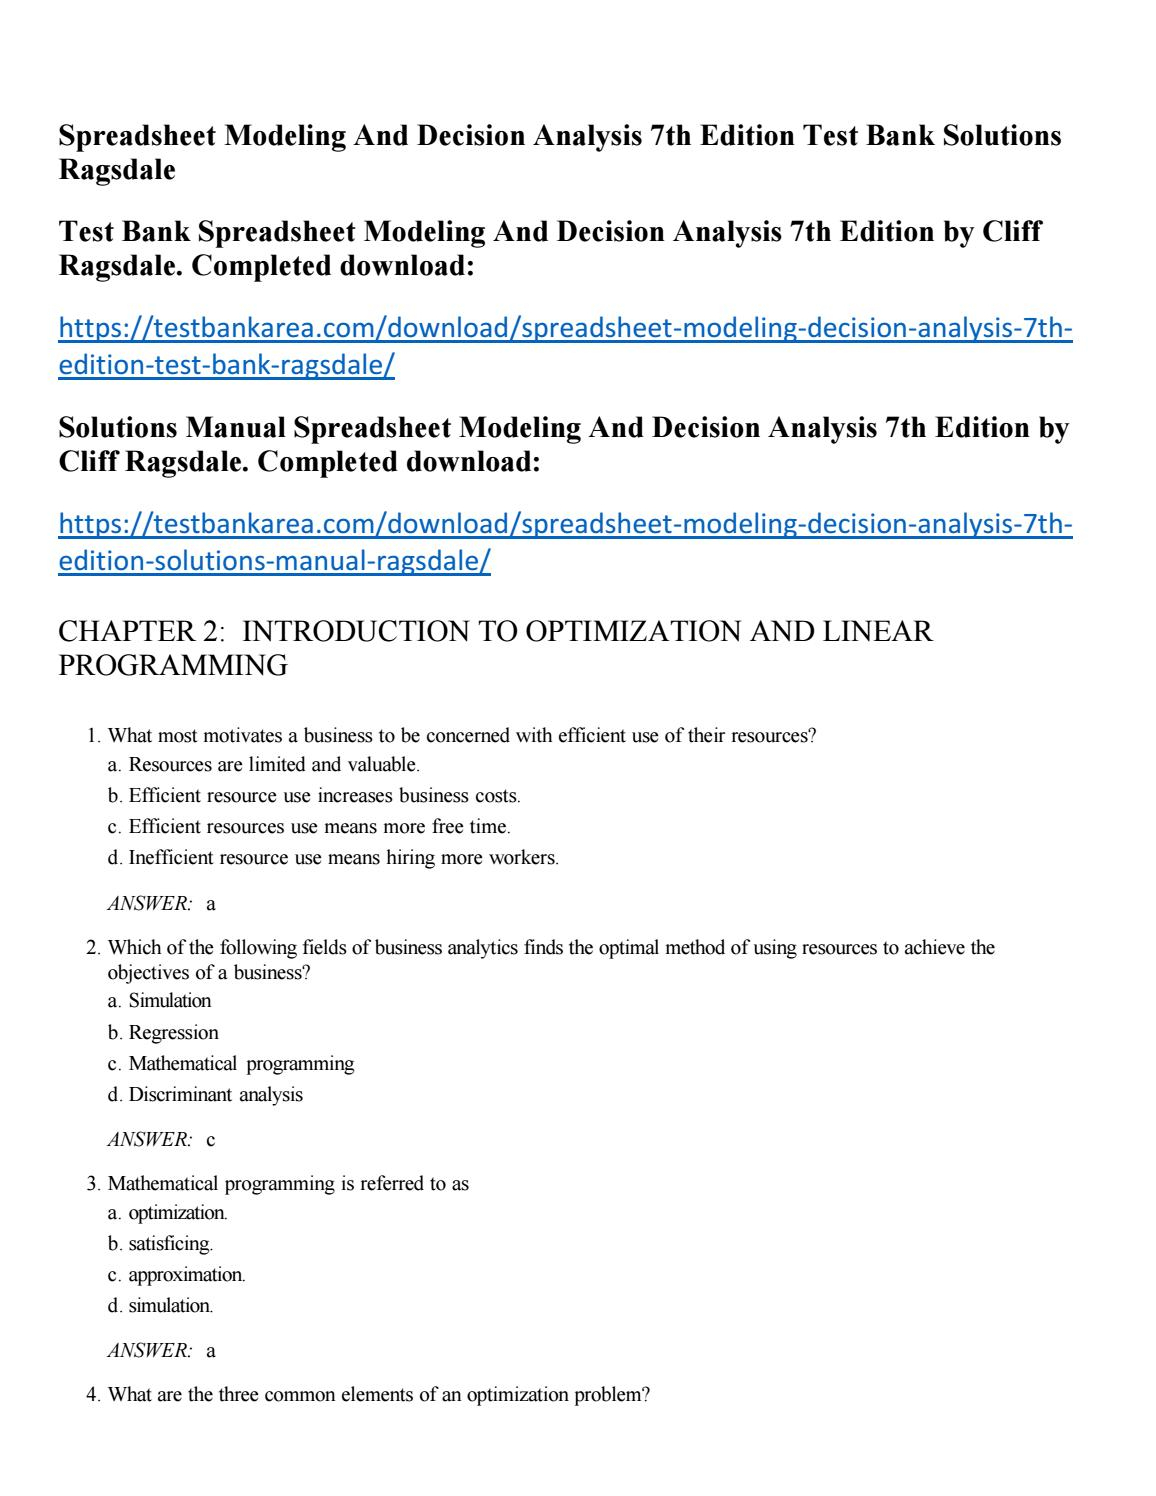 Optimization Modeling With Spreadsheets Solutions Within Spreadsheet Modeling And Decision Analysis 7Th Edition Test Bank